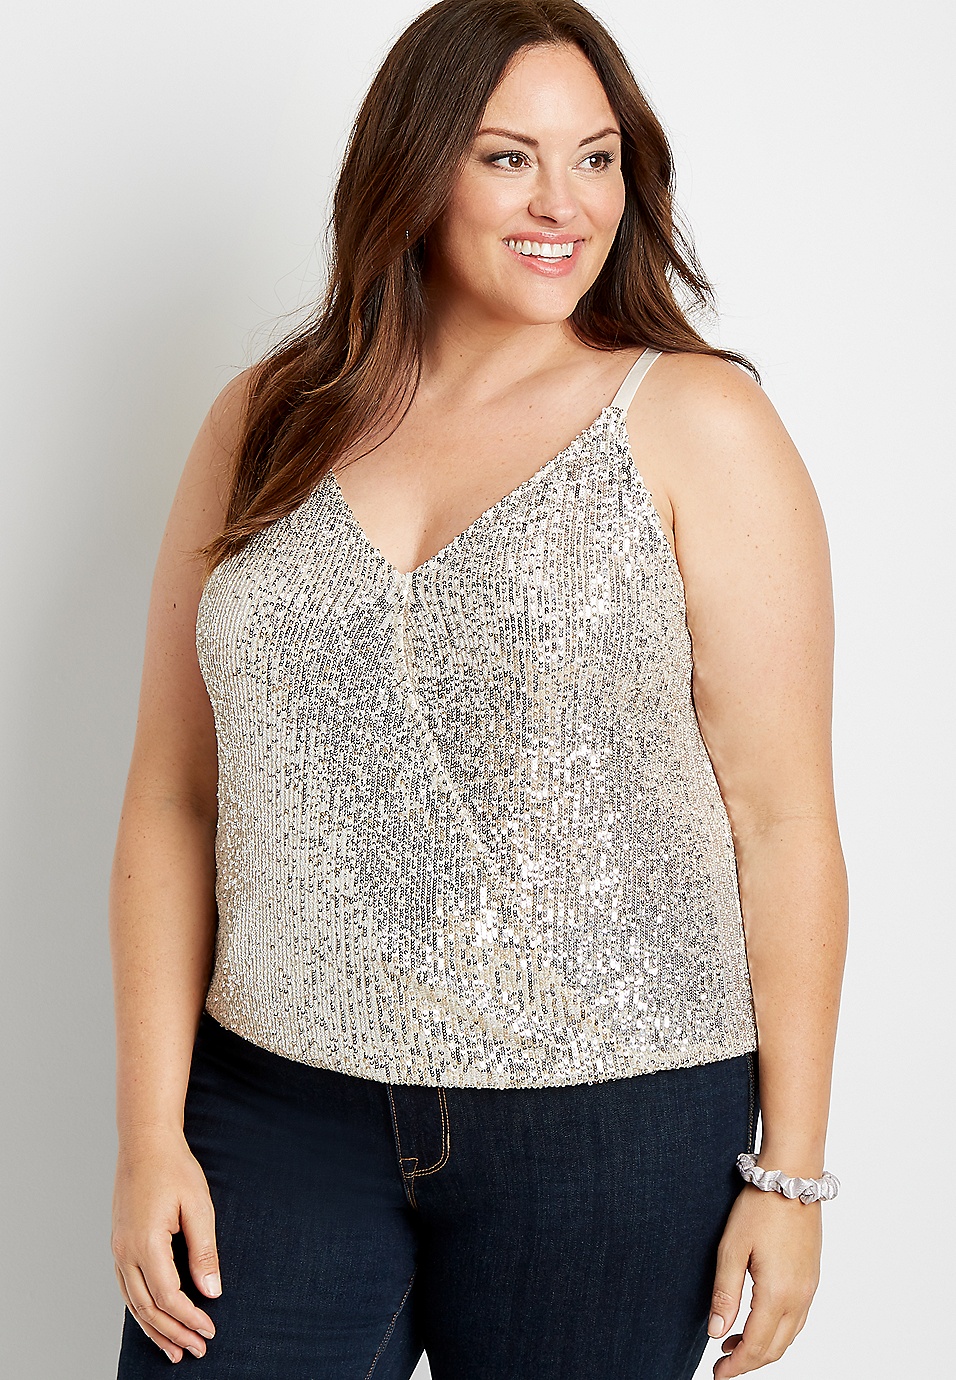 Plus Size Clothes For Women, Basics Womens Clothing Sparkly Tops